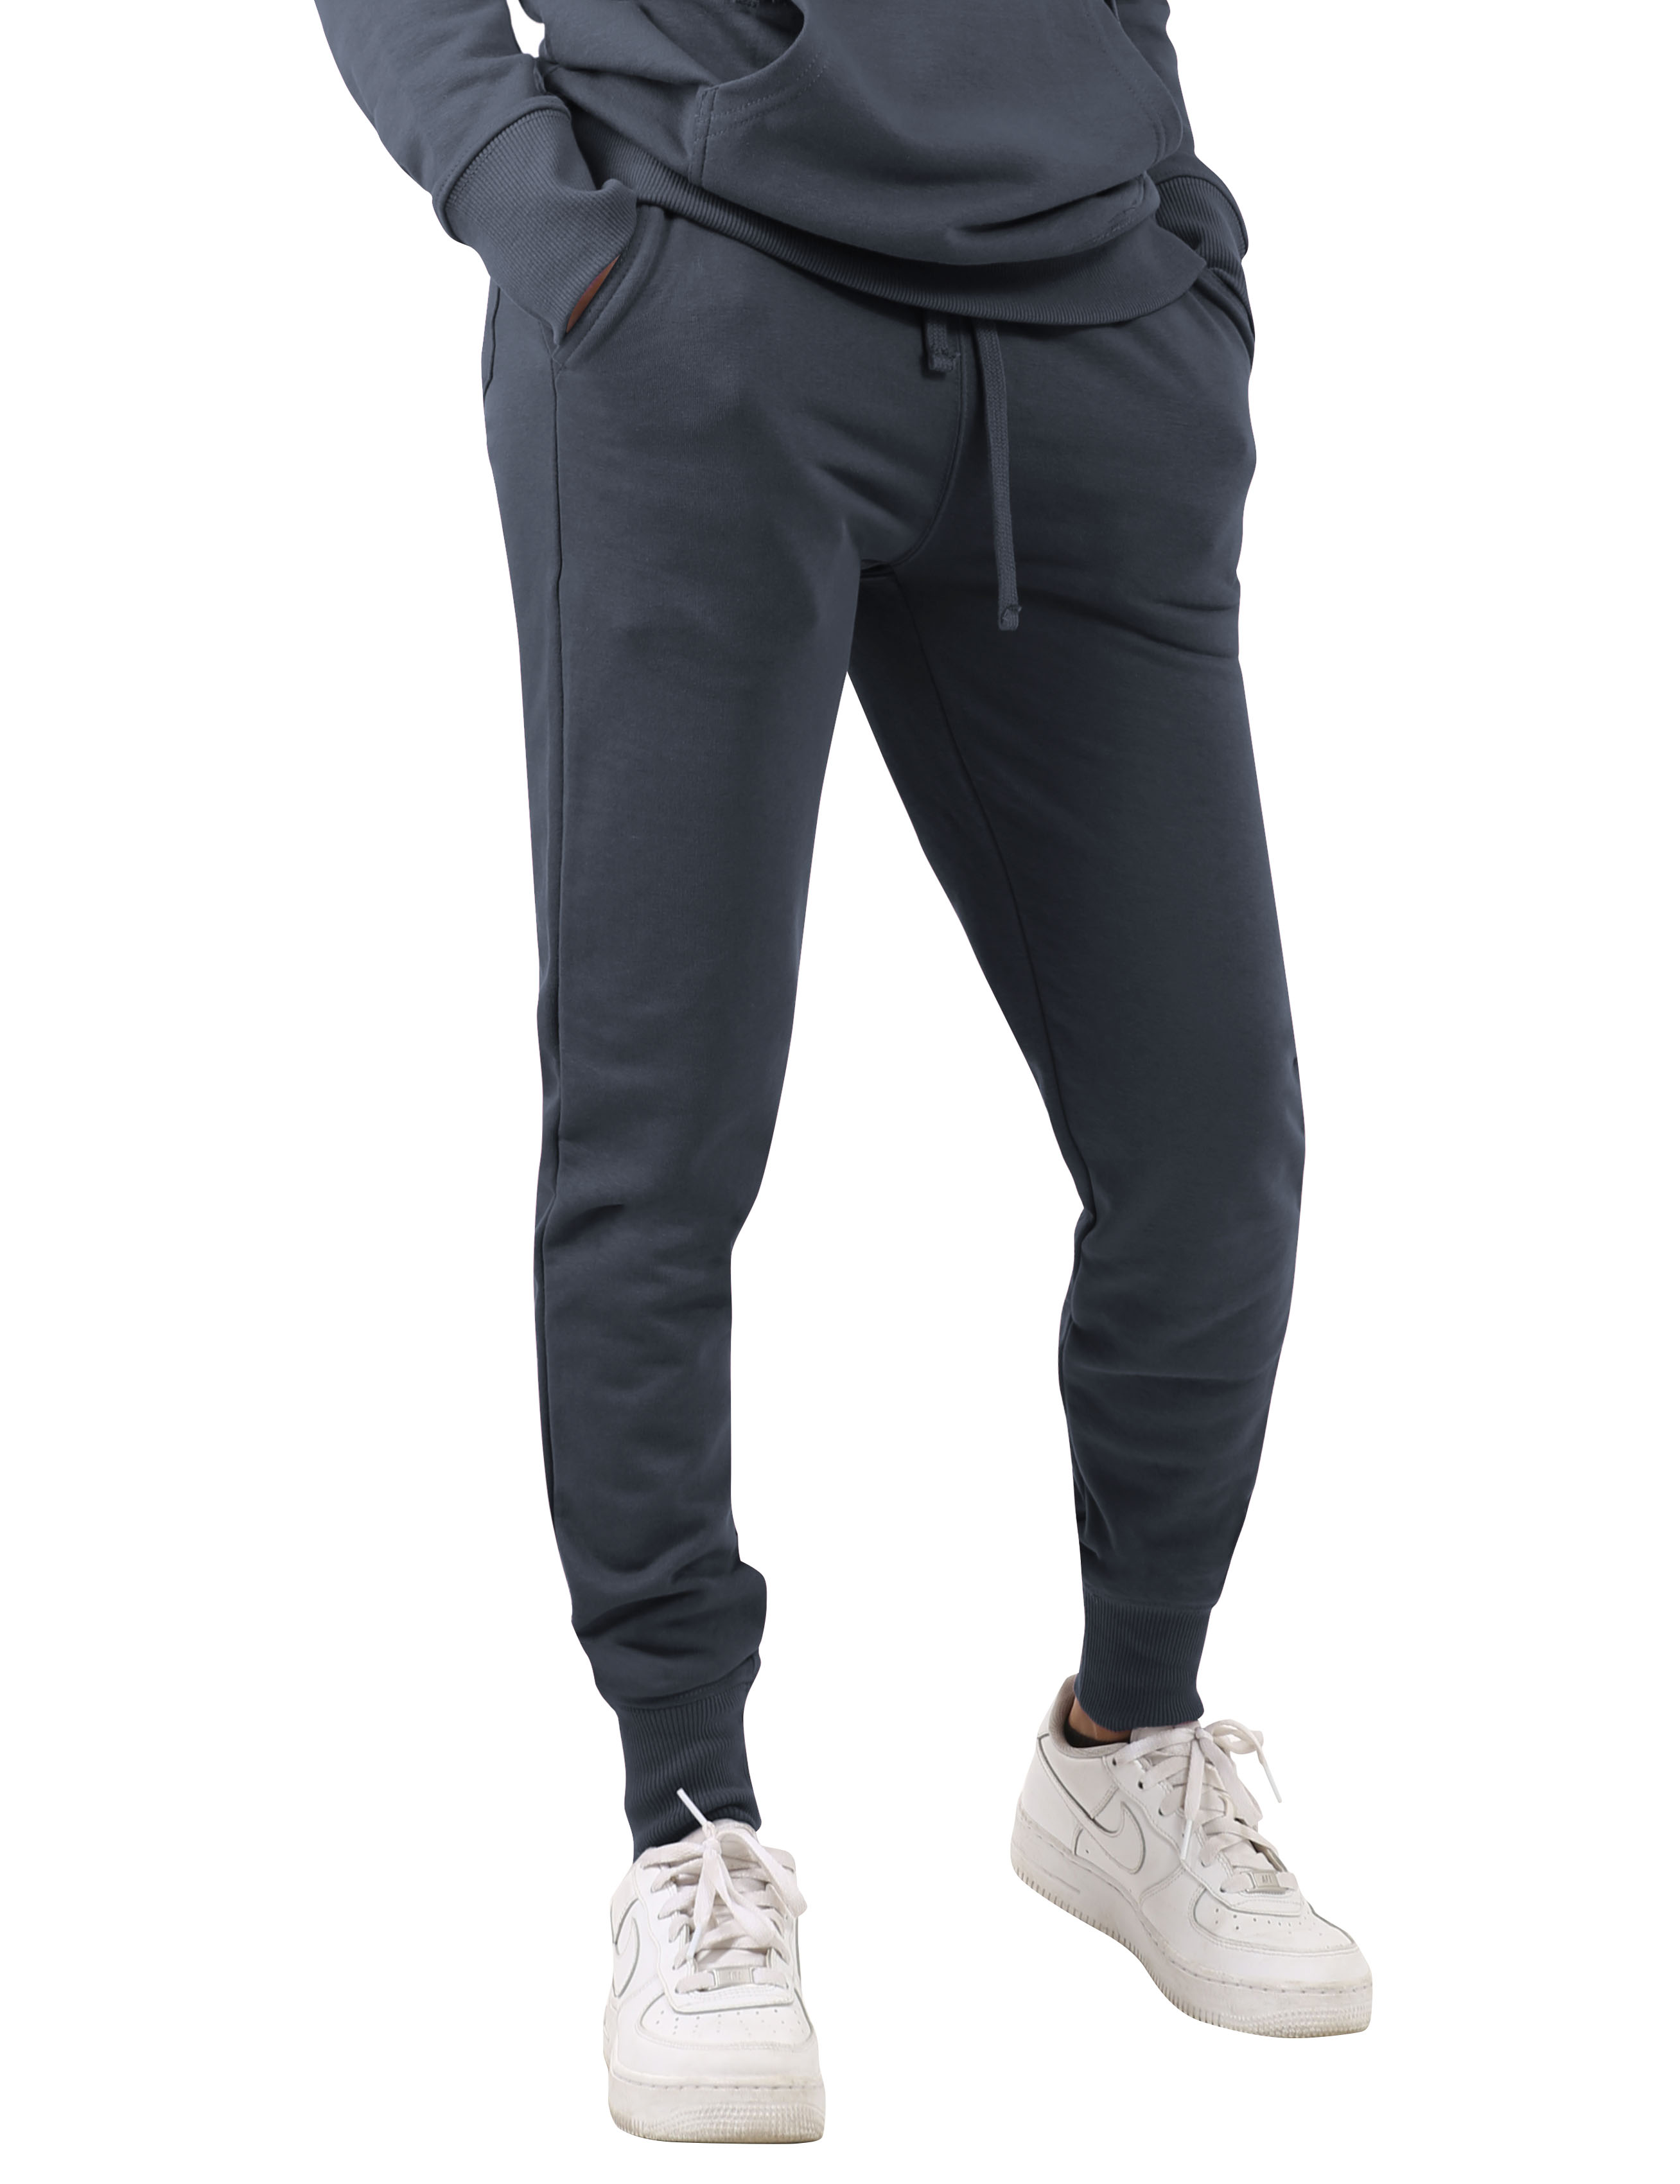 Ma Croix Womens Premium French Terry Joggers Wrinkle Resistant Sweatpants - image 1 of 6